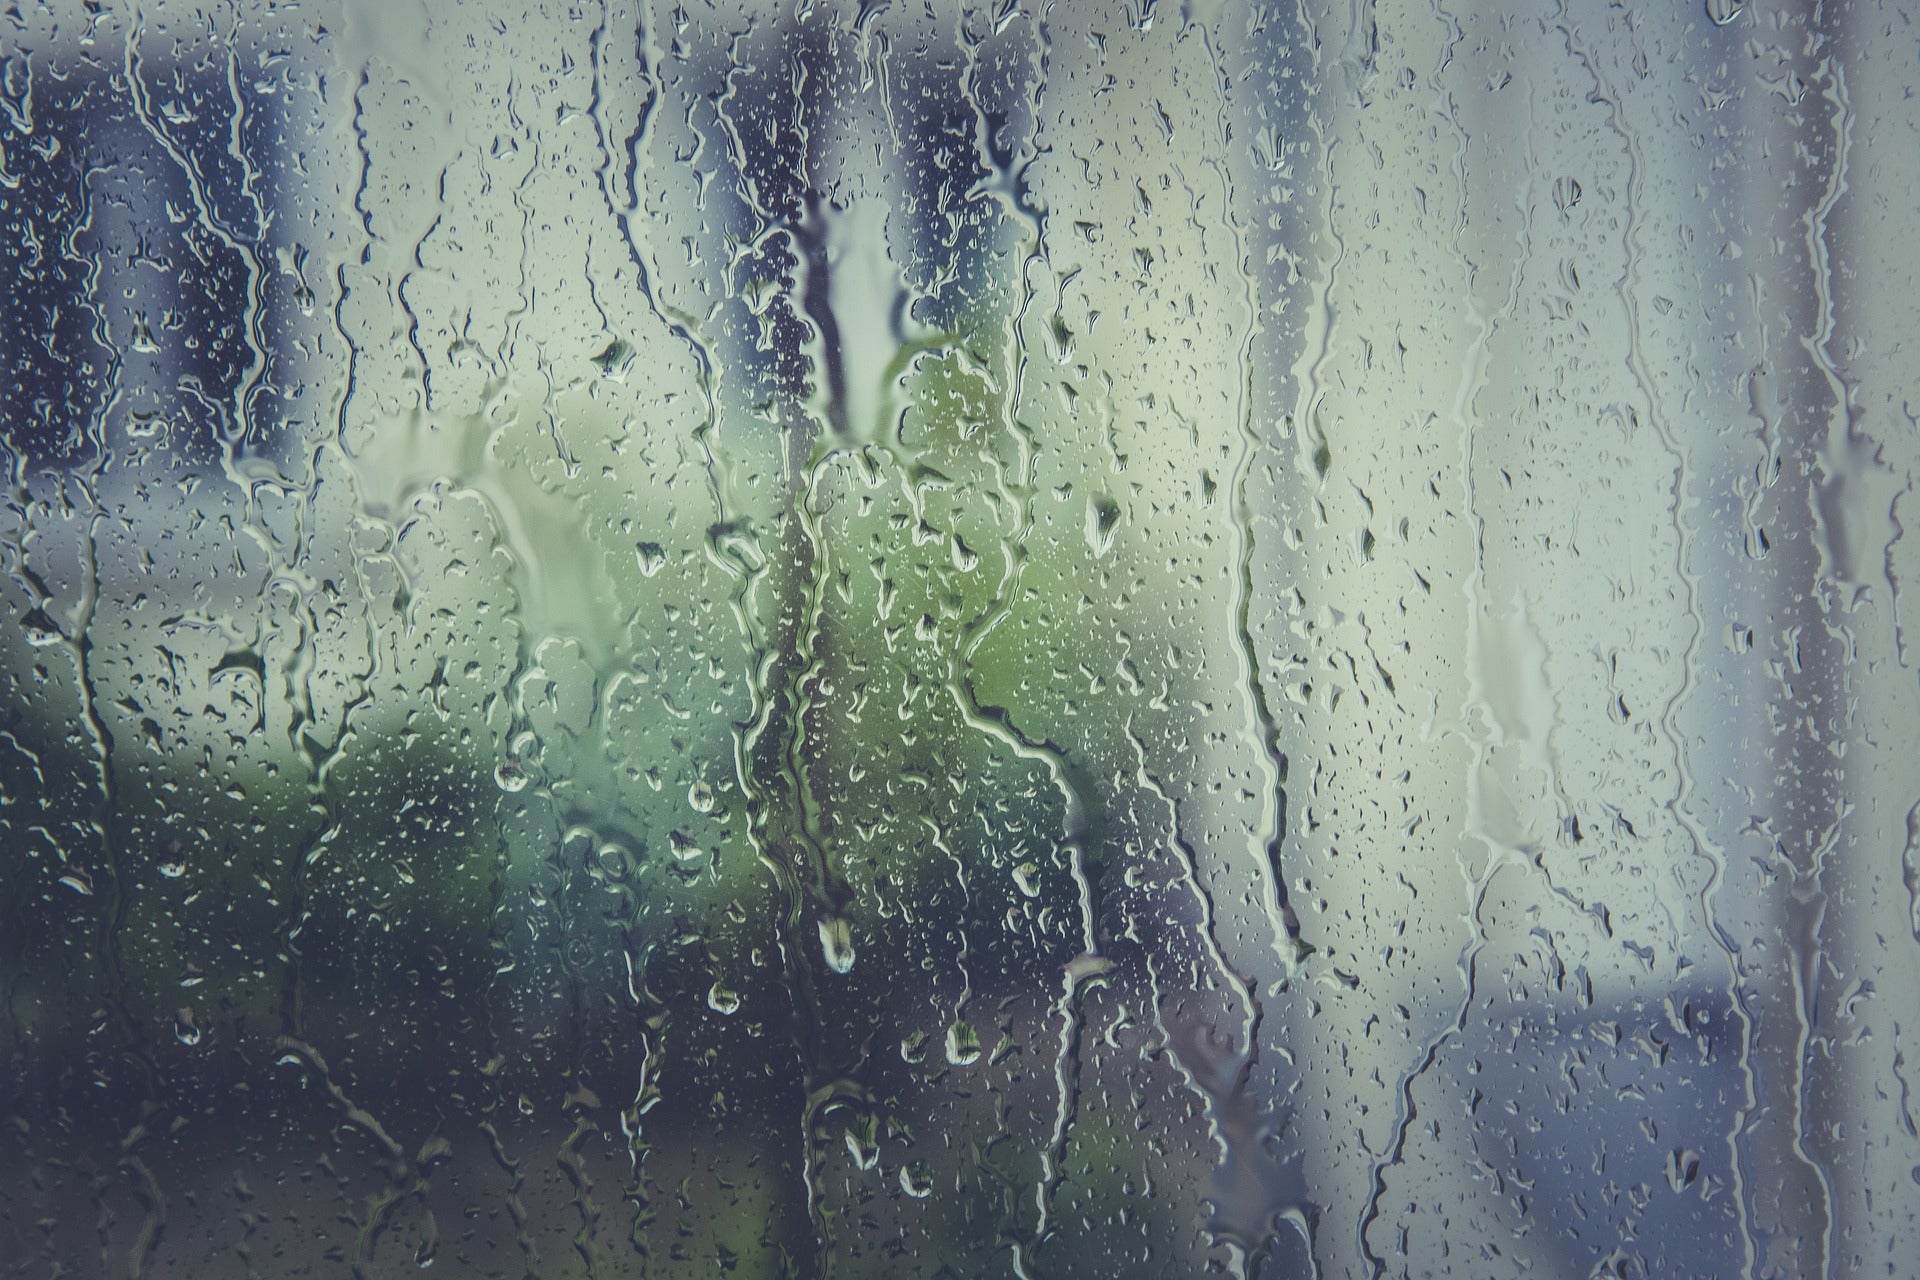 All About Condensation: How to Reduce and Prevent Condensation